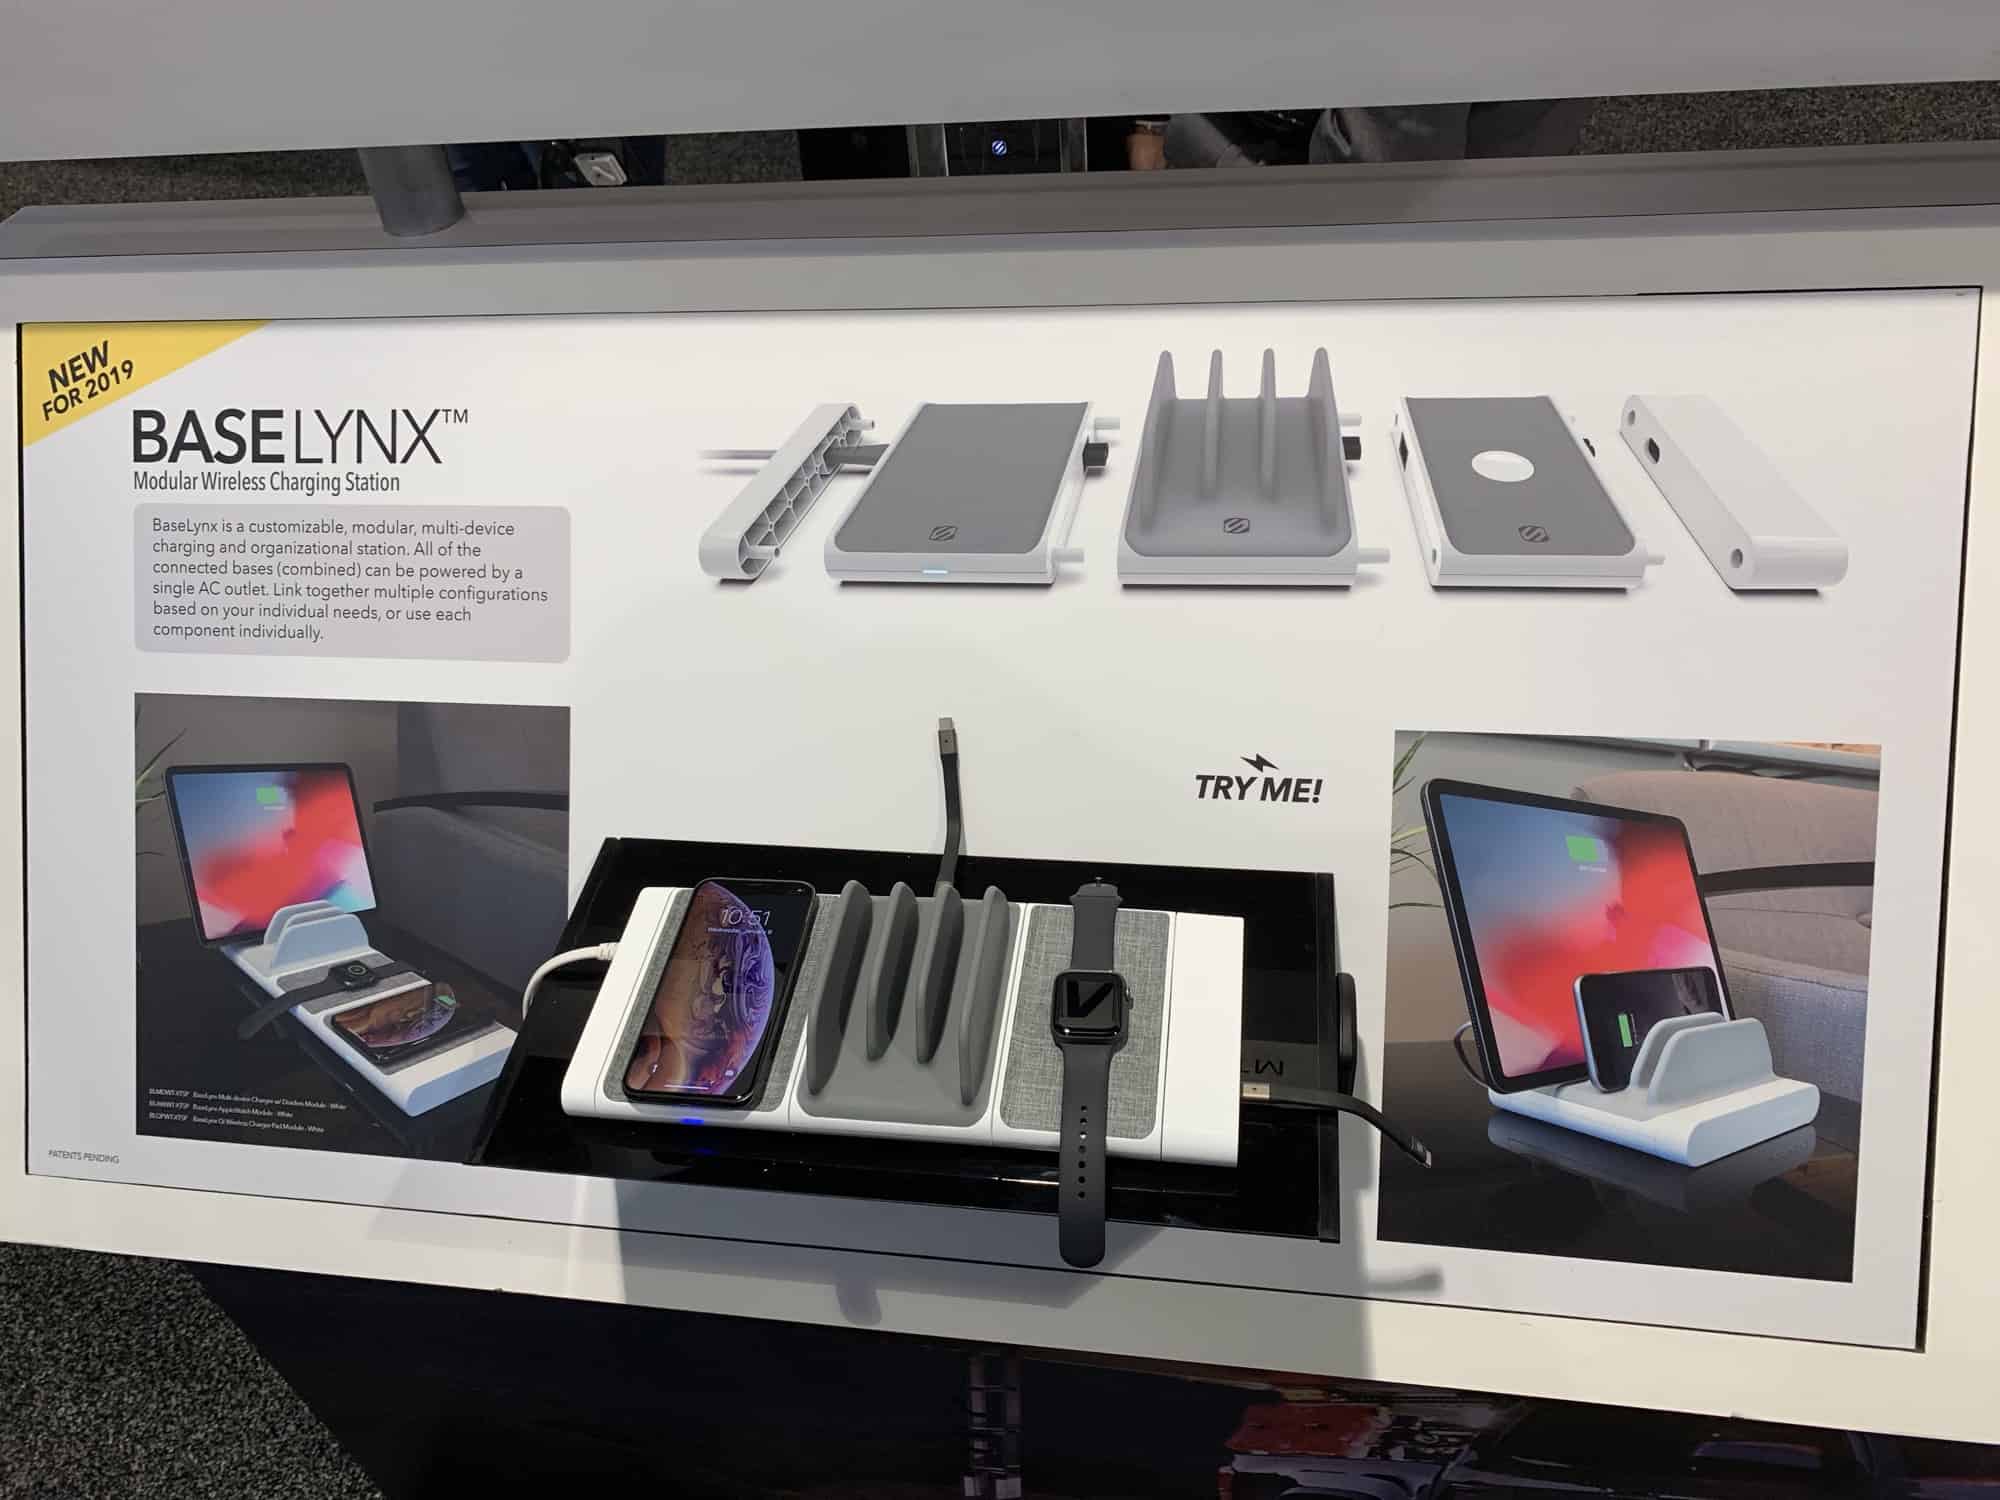 CES – Scosche BaseLynx Modular Wireless Charging Station Organizes and Charges Your Devices